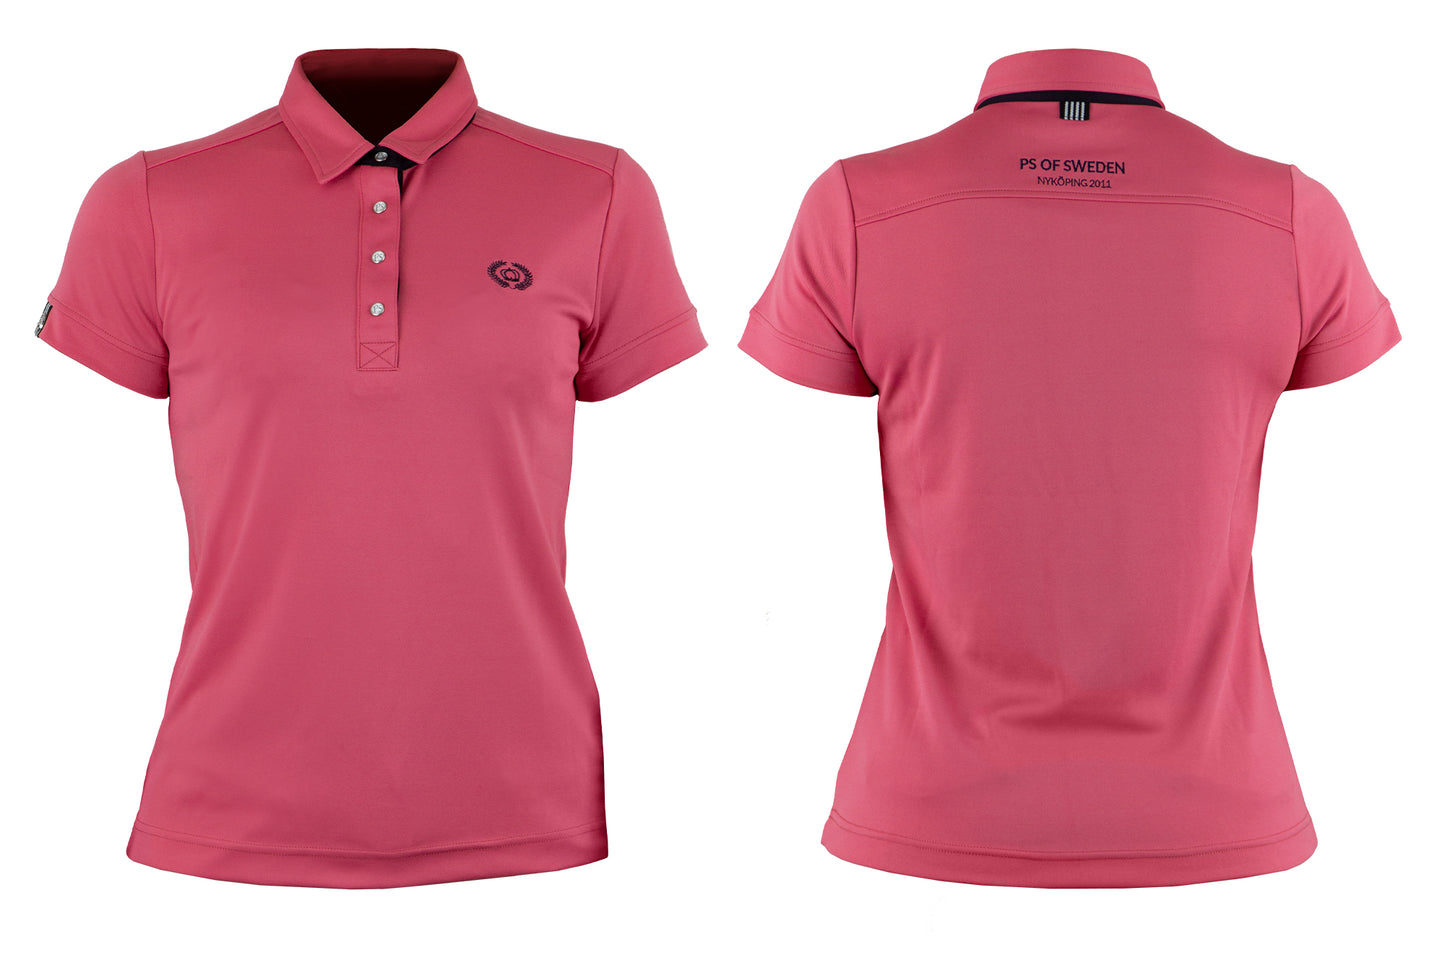 PS of Sweden SS20 Darling Polo Shirt - Choose Colour - Blueberry, Cranberry, Vanilla